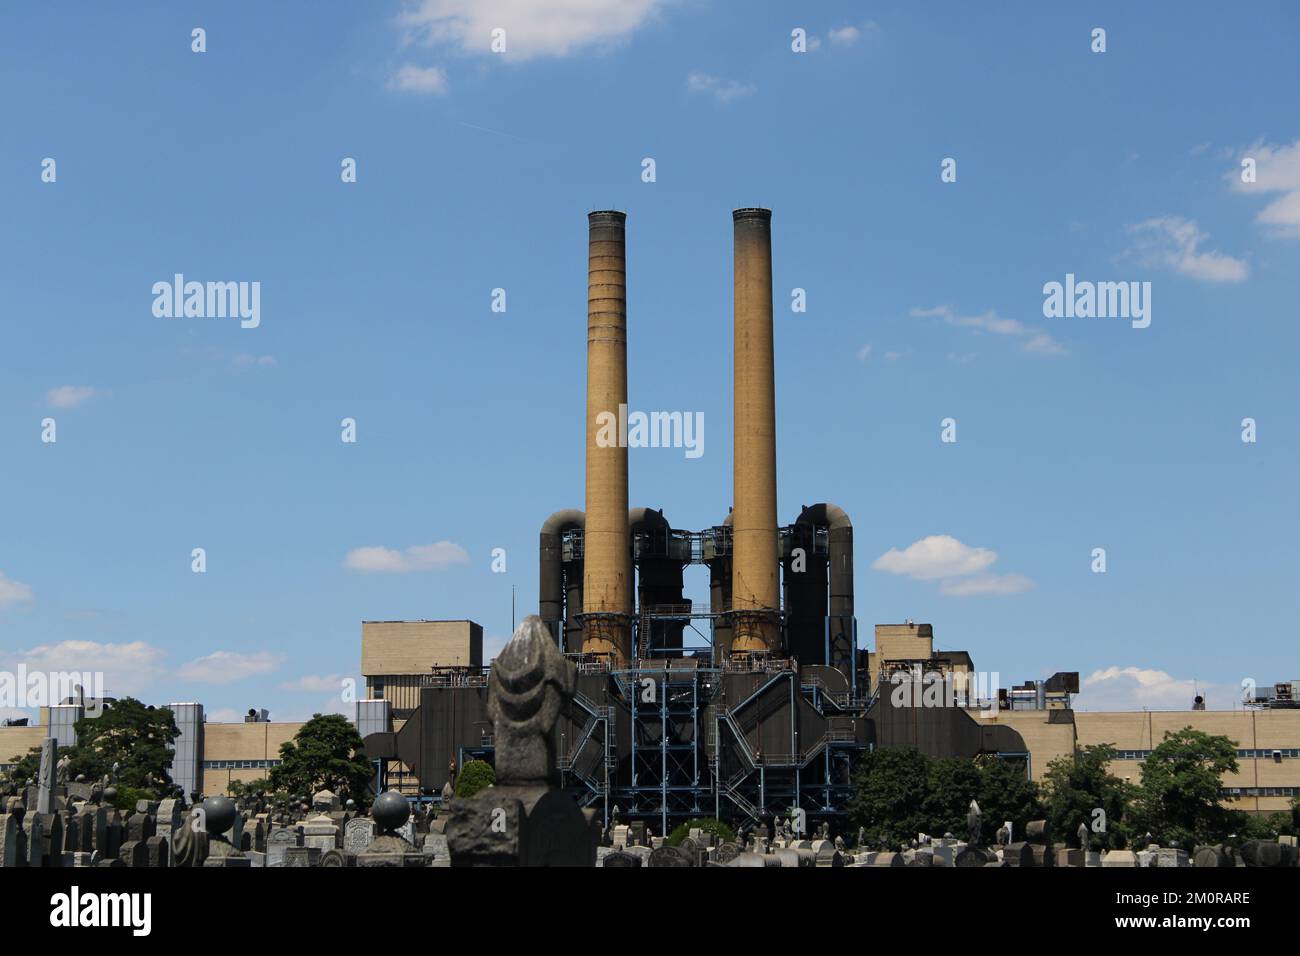 Photograph of Betts Avenue Incinerator in Maspeth Queens with Mt. Zion Cemetery also in view. Stock Photo